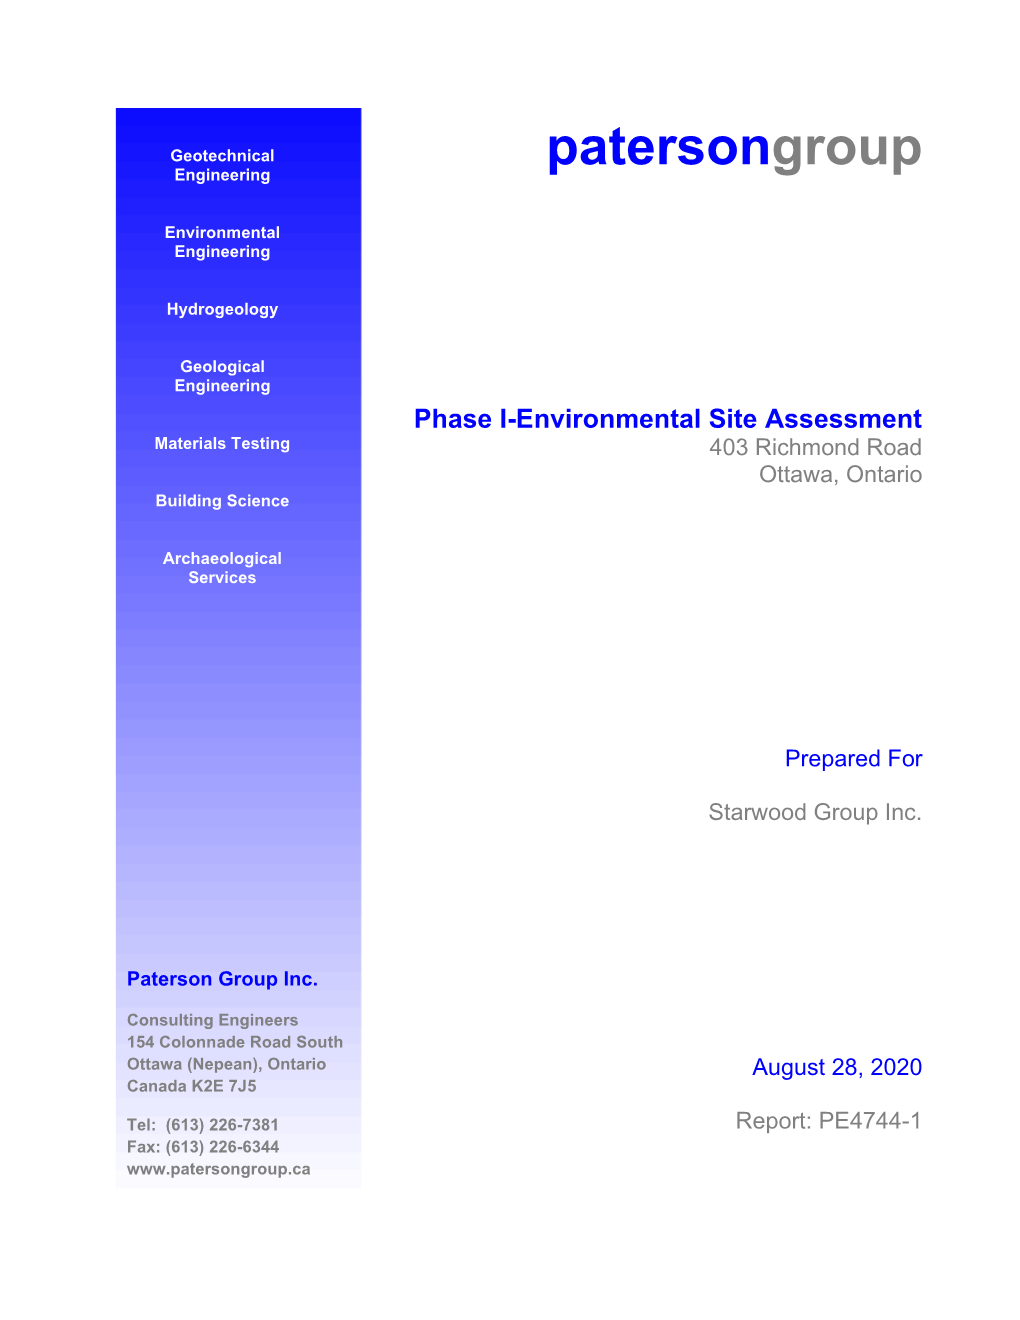 Patersongroup Phase I-Environmental Site Assessment